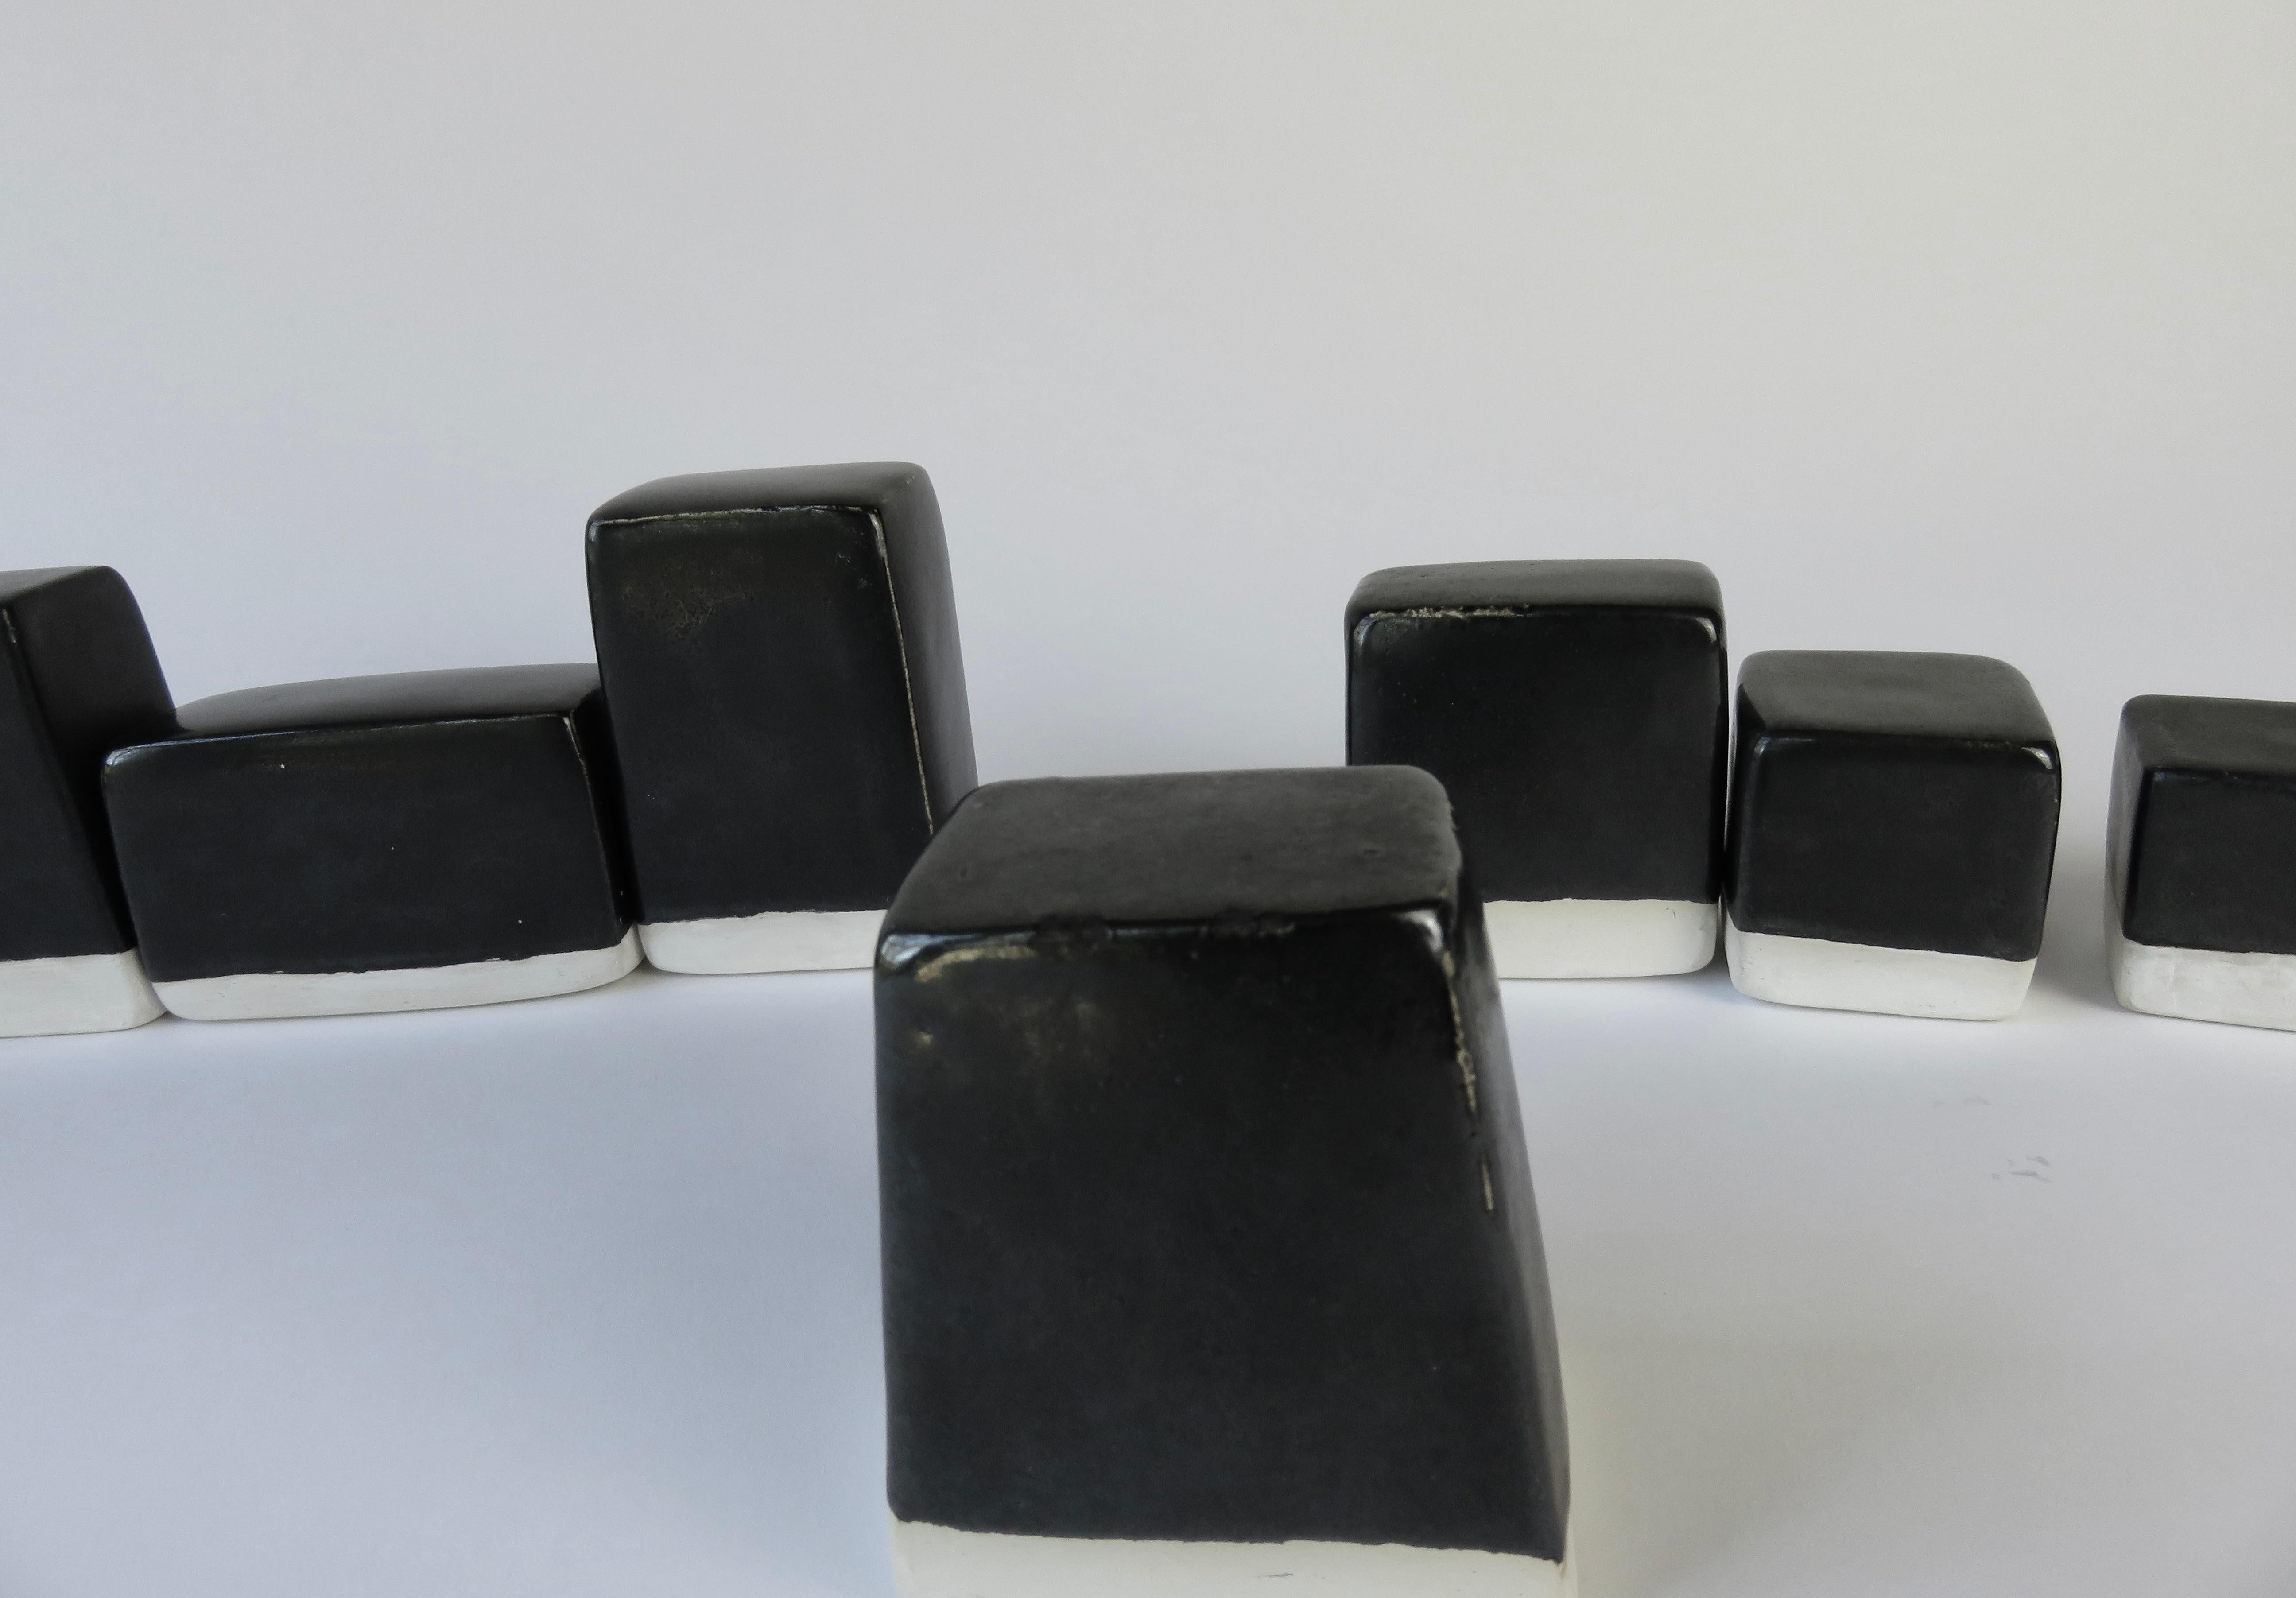 Hand-Crafted 5 Glazed Black and White Stackable, Moveable Blocks